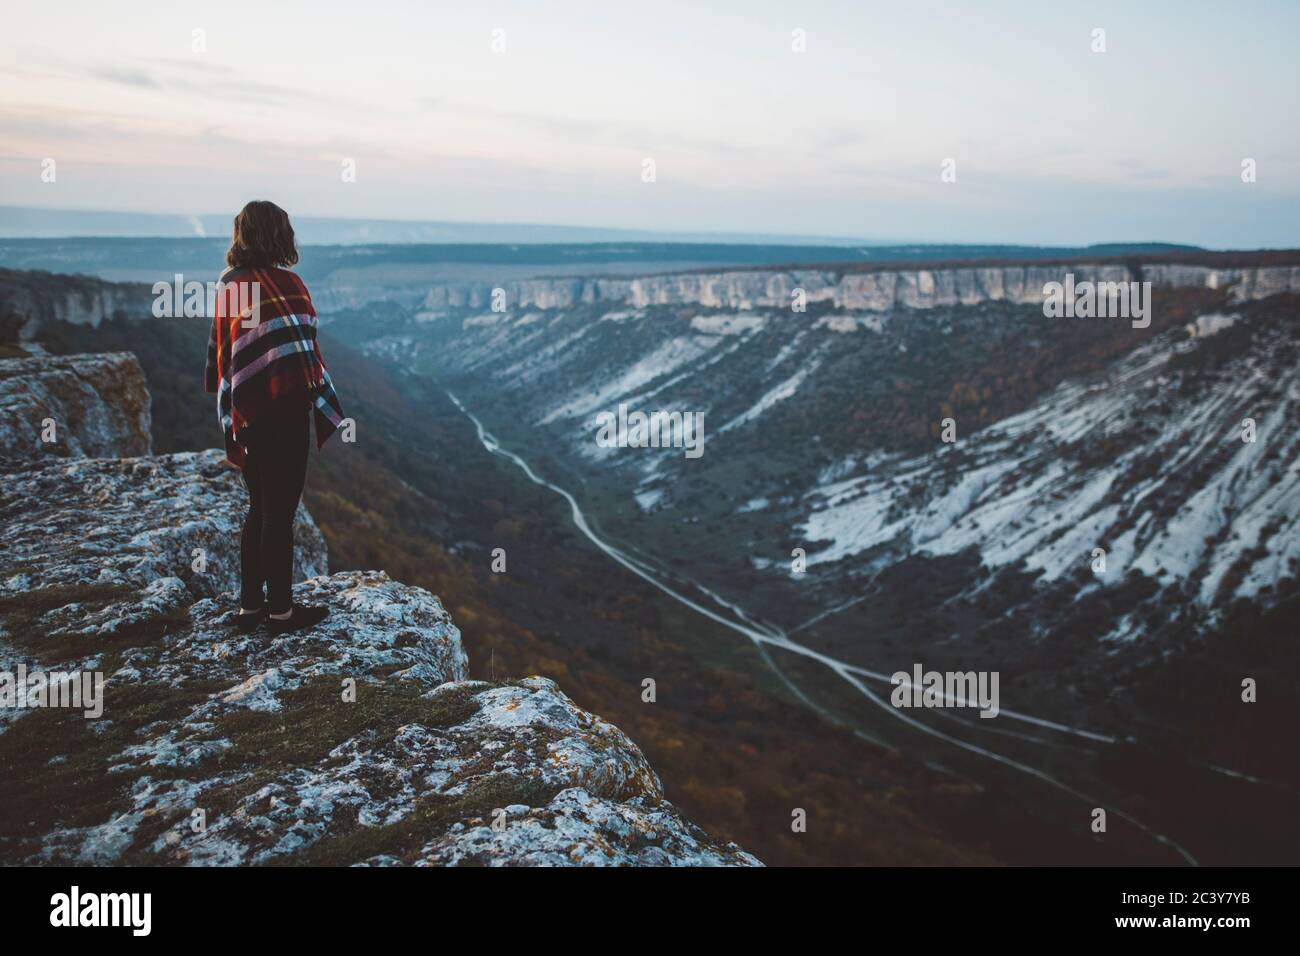 Ukraine, Crimea, Young woman covered with plaid looking at canyon Stock Photo